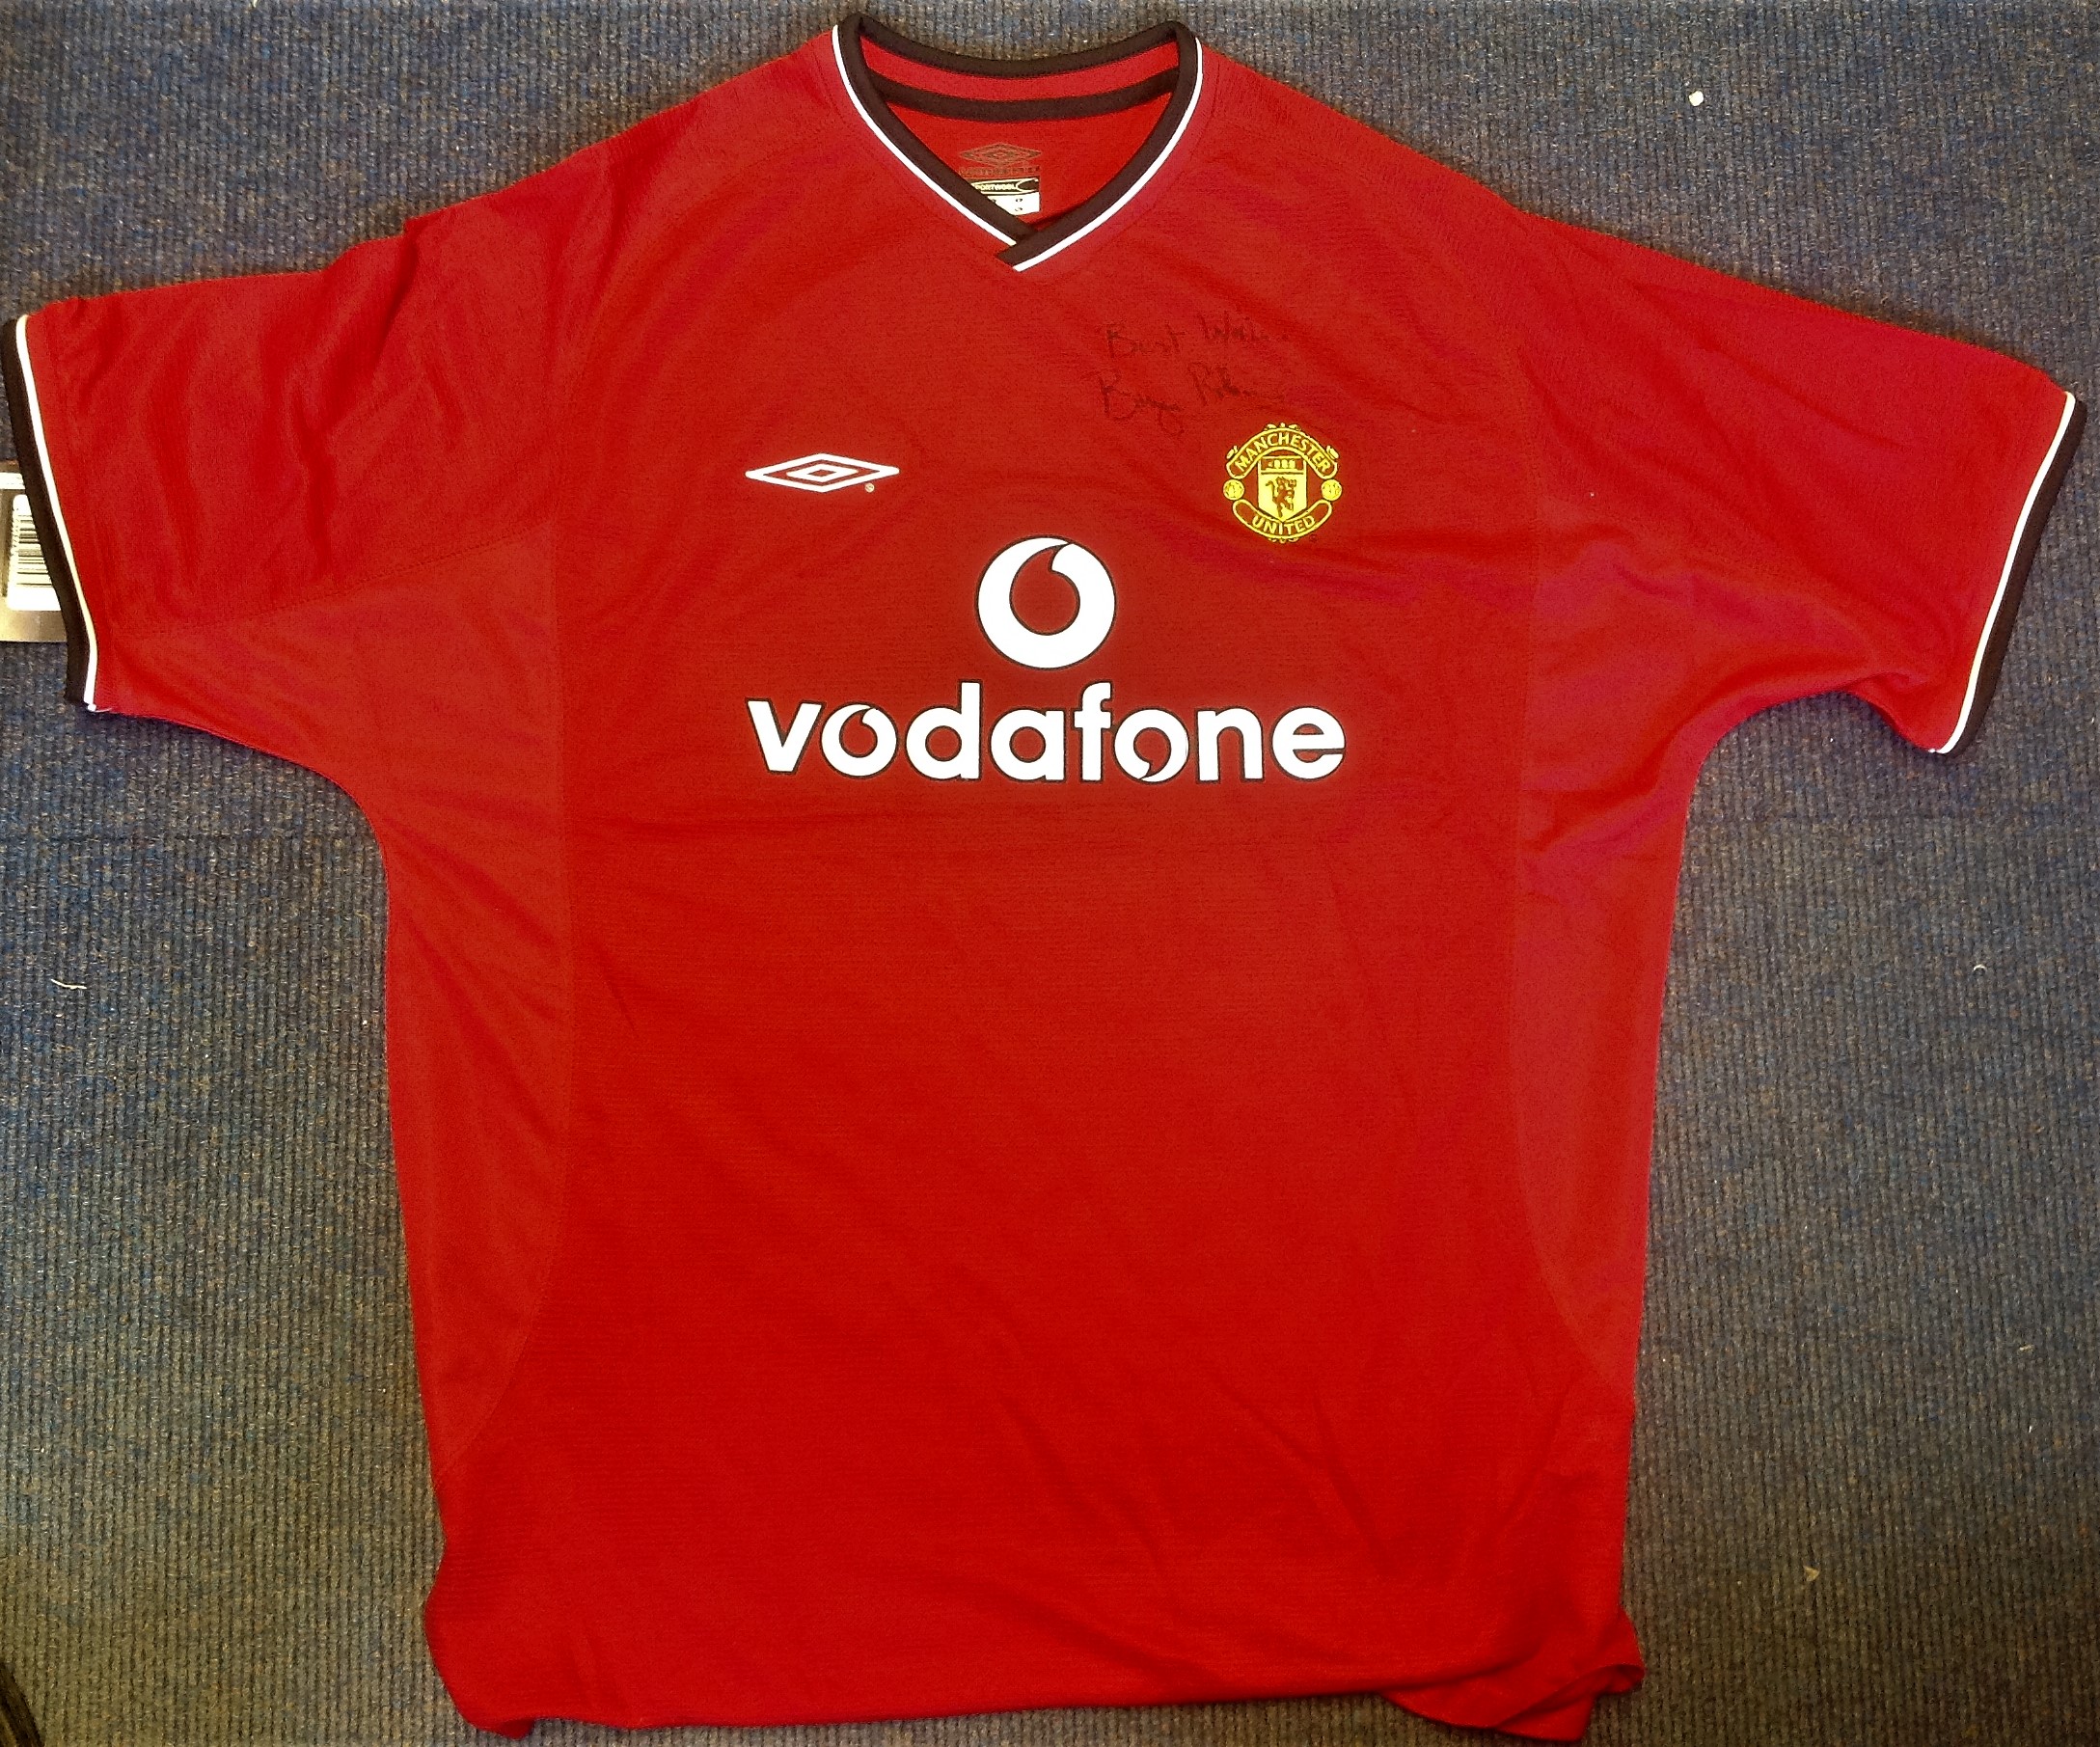 Bryan Robson Signed Manchester United Shirt. Good Condition. All autographs come with a - Image 2 of 2